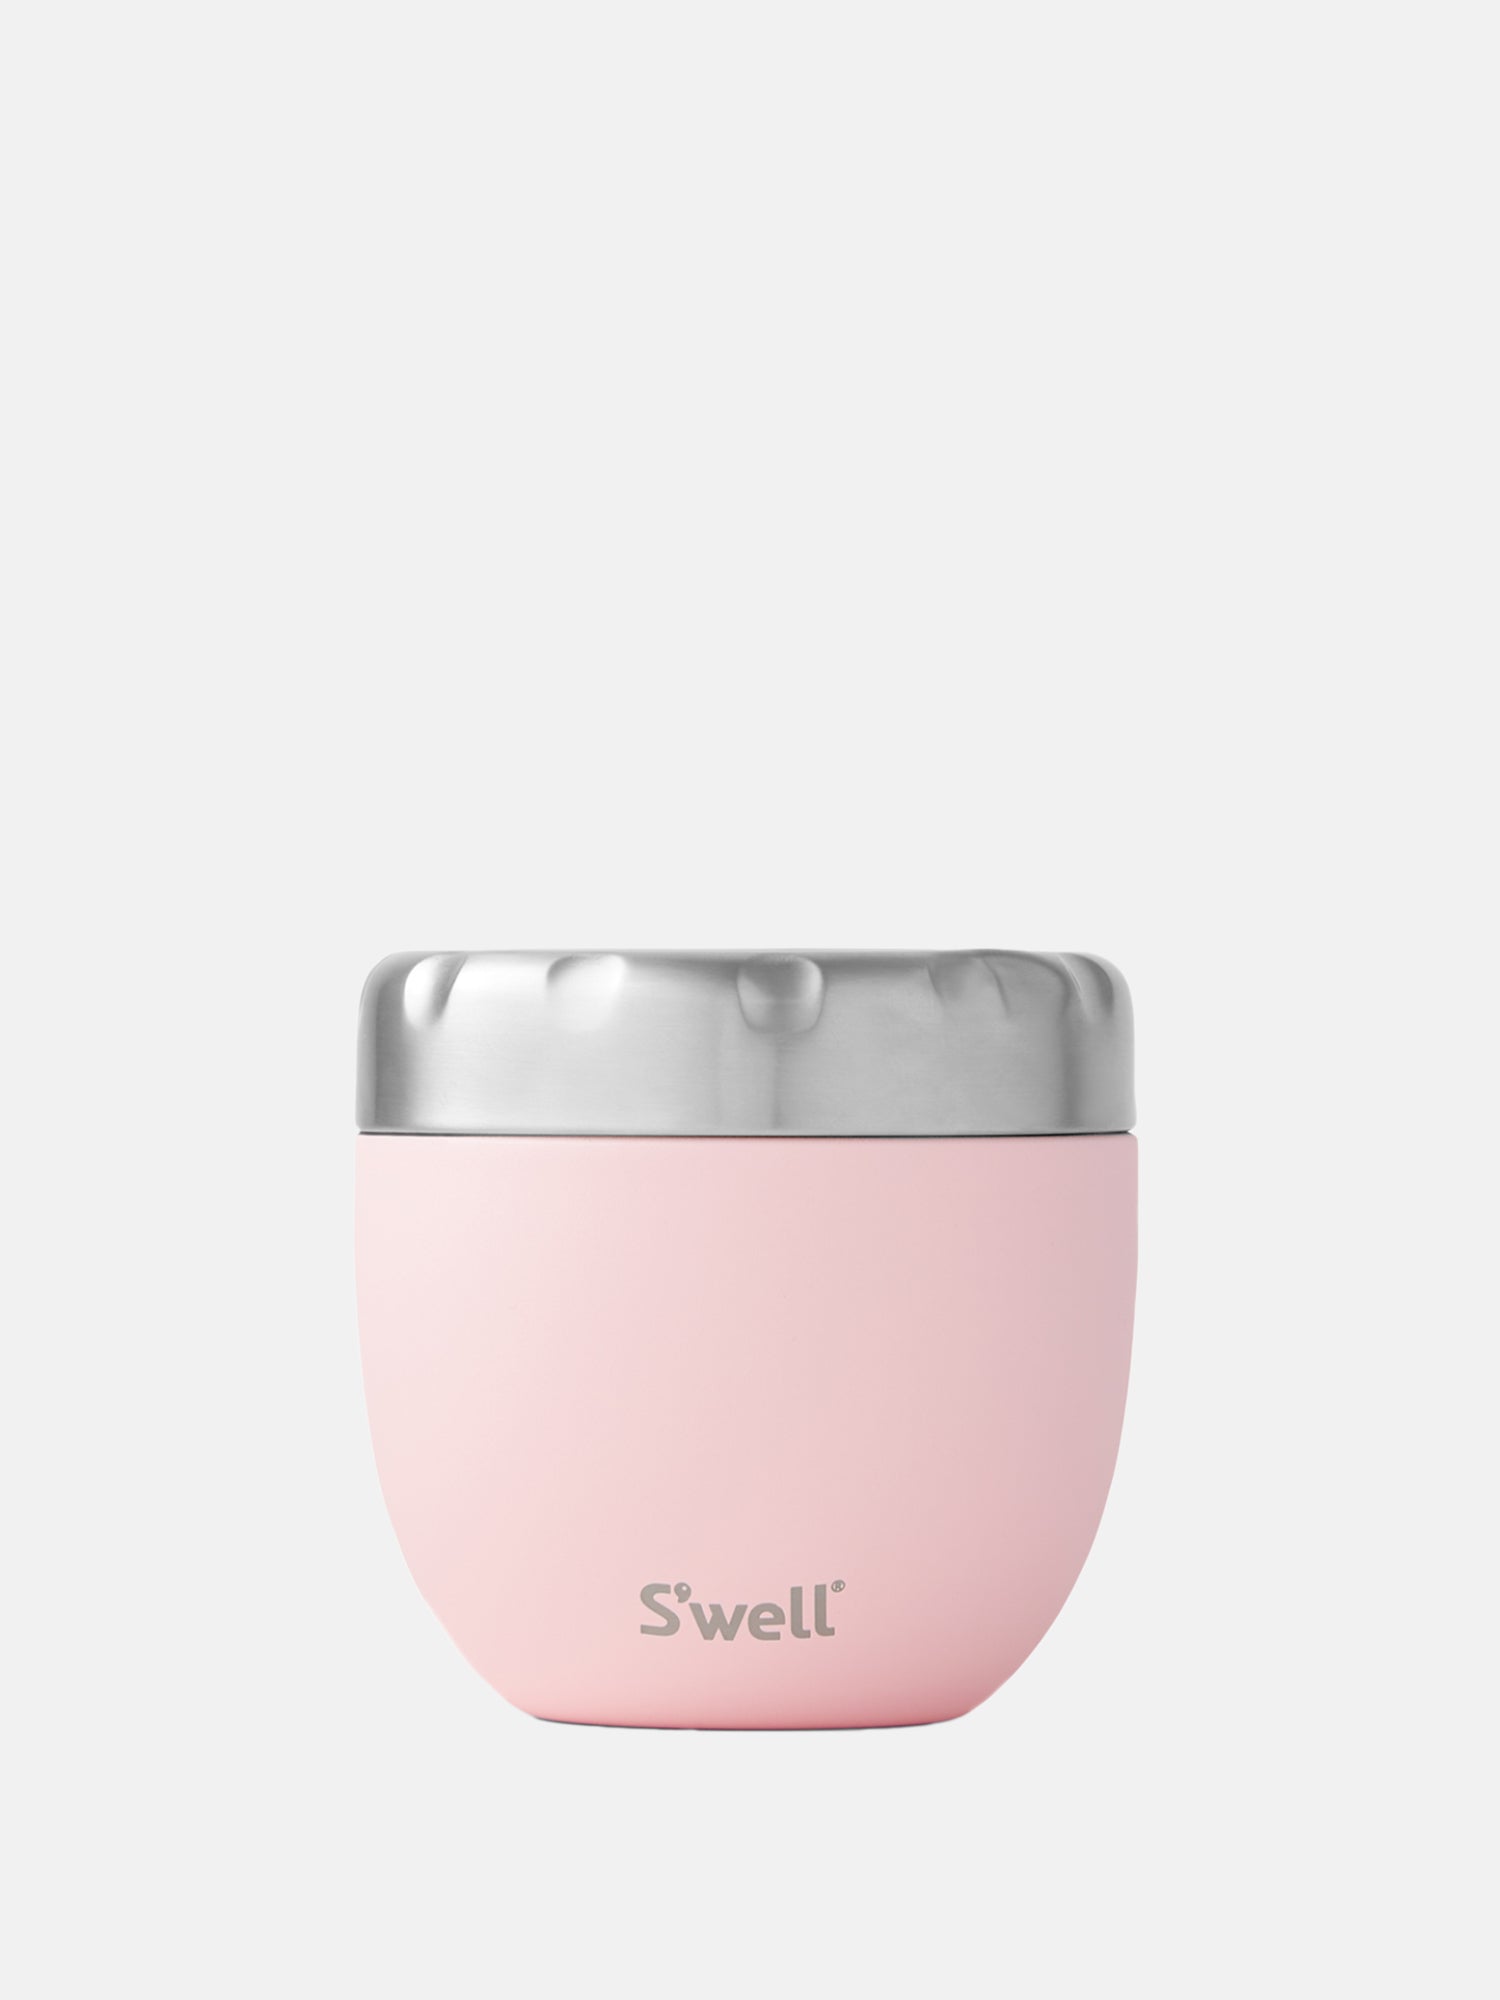 S'well Eats Insulated Food Bowl Set 21.5oz, Pink T – Blancsom